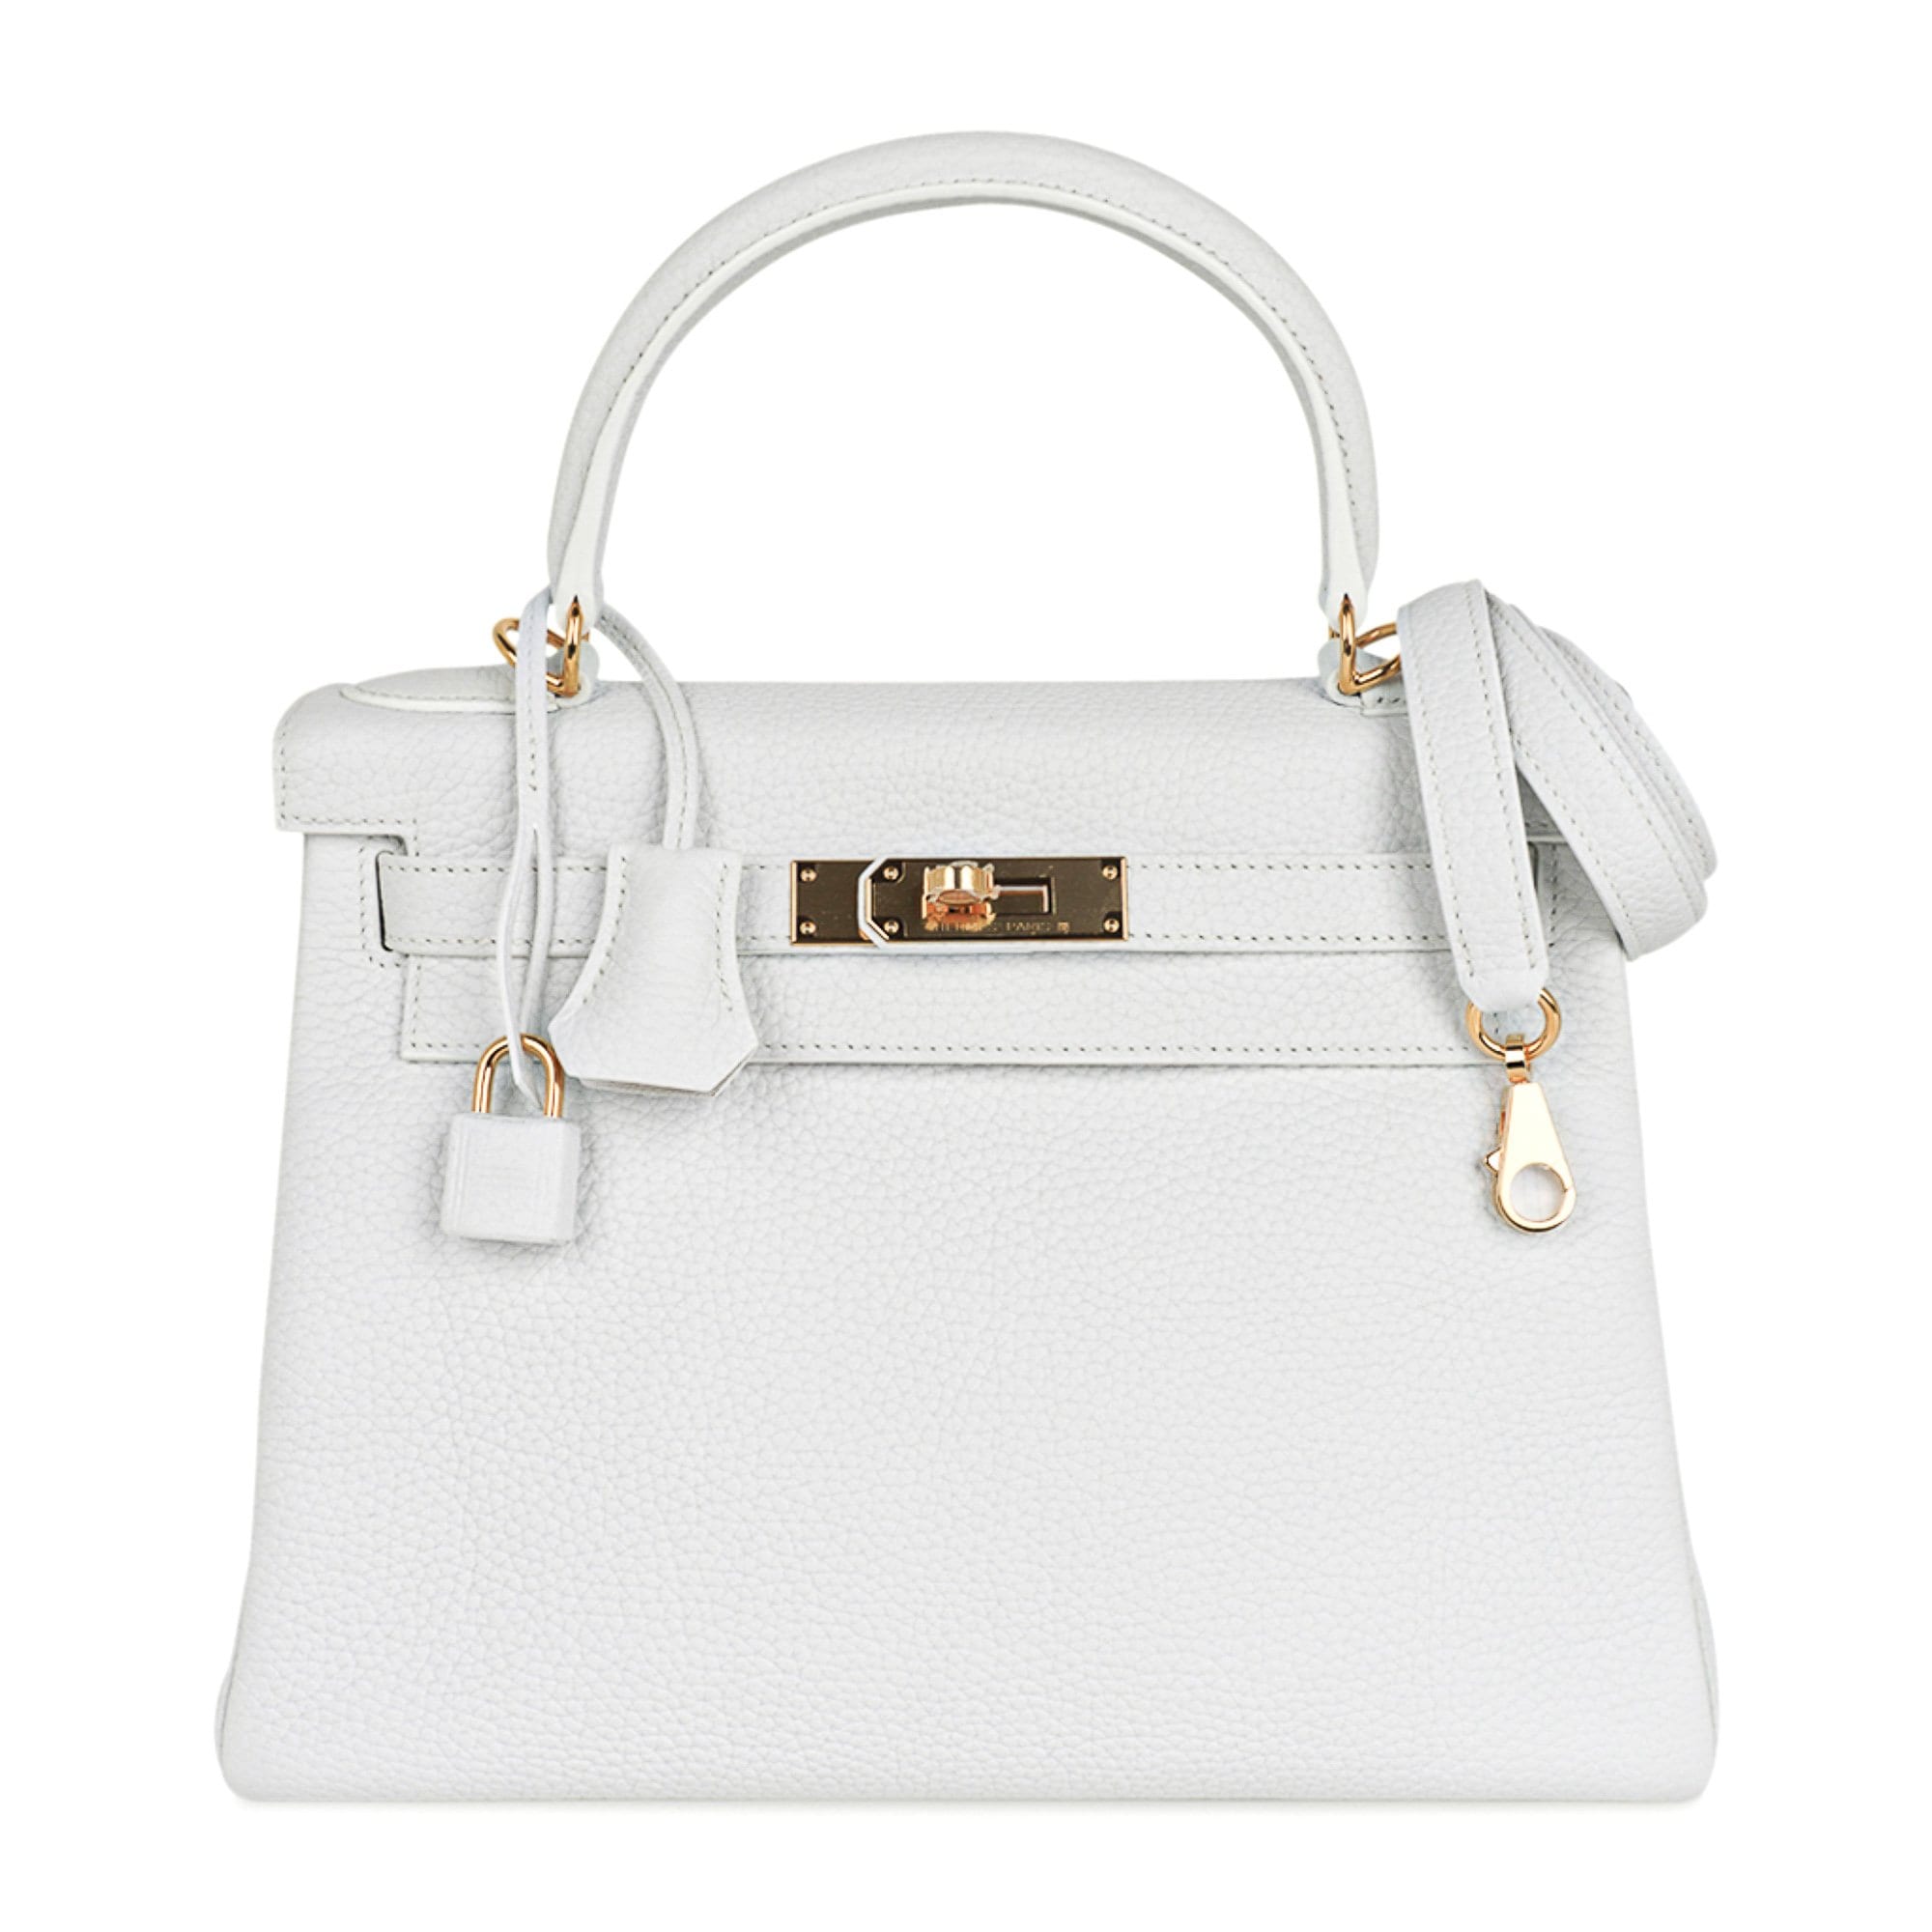 HERMÈS Kelly Bags & Handbags for Women, Authenticity Guaranteed